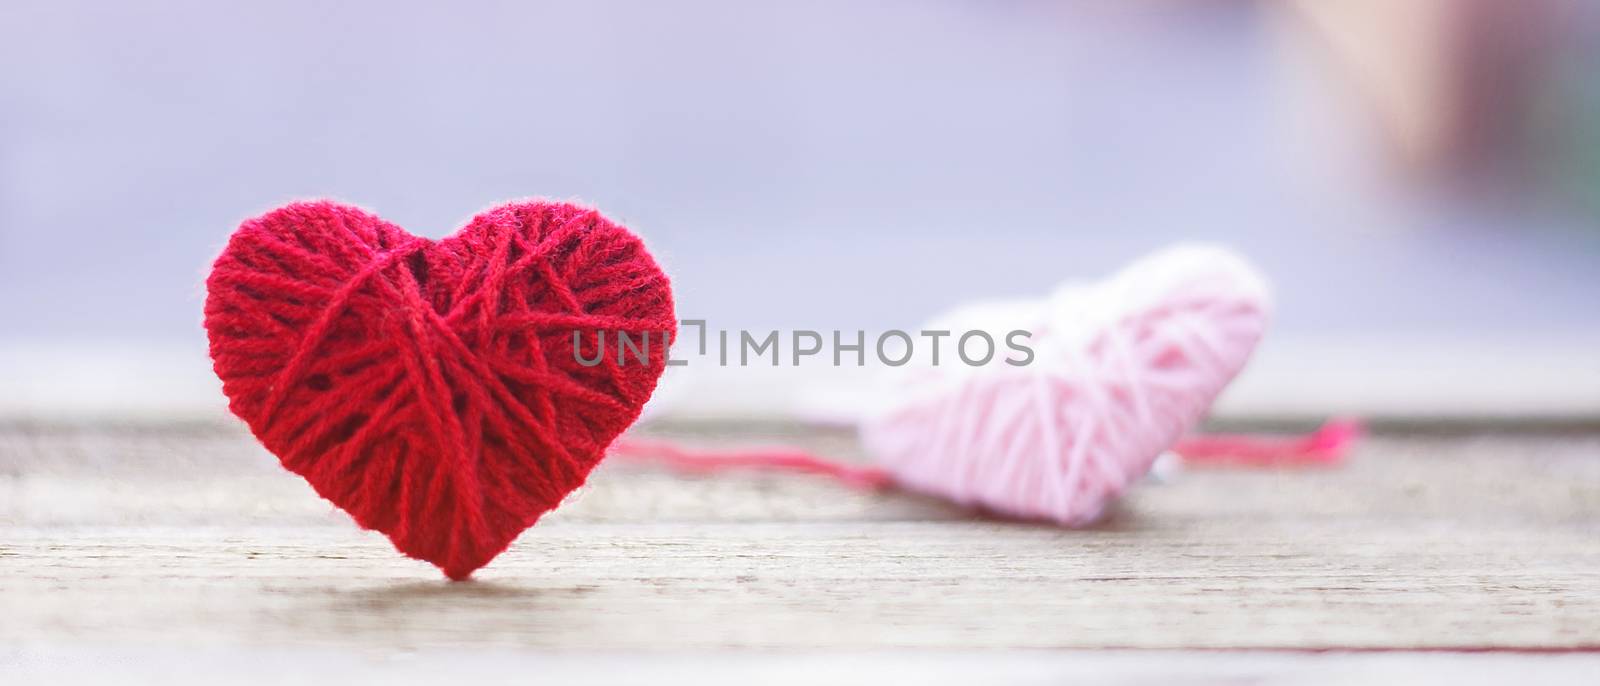 red knitting wool in shape of heart on vintage wooden with bokeh soft light background